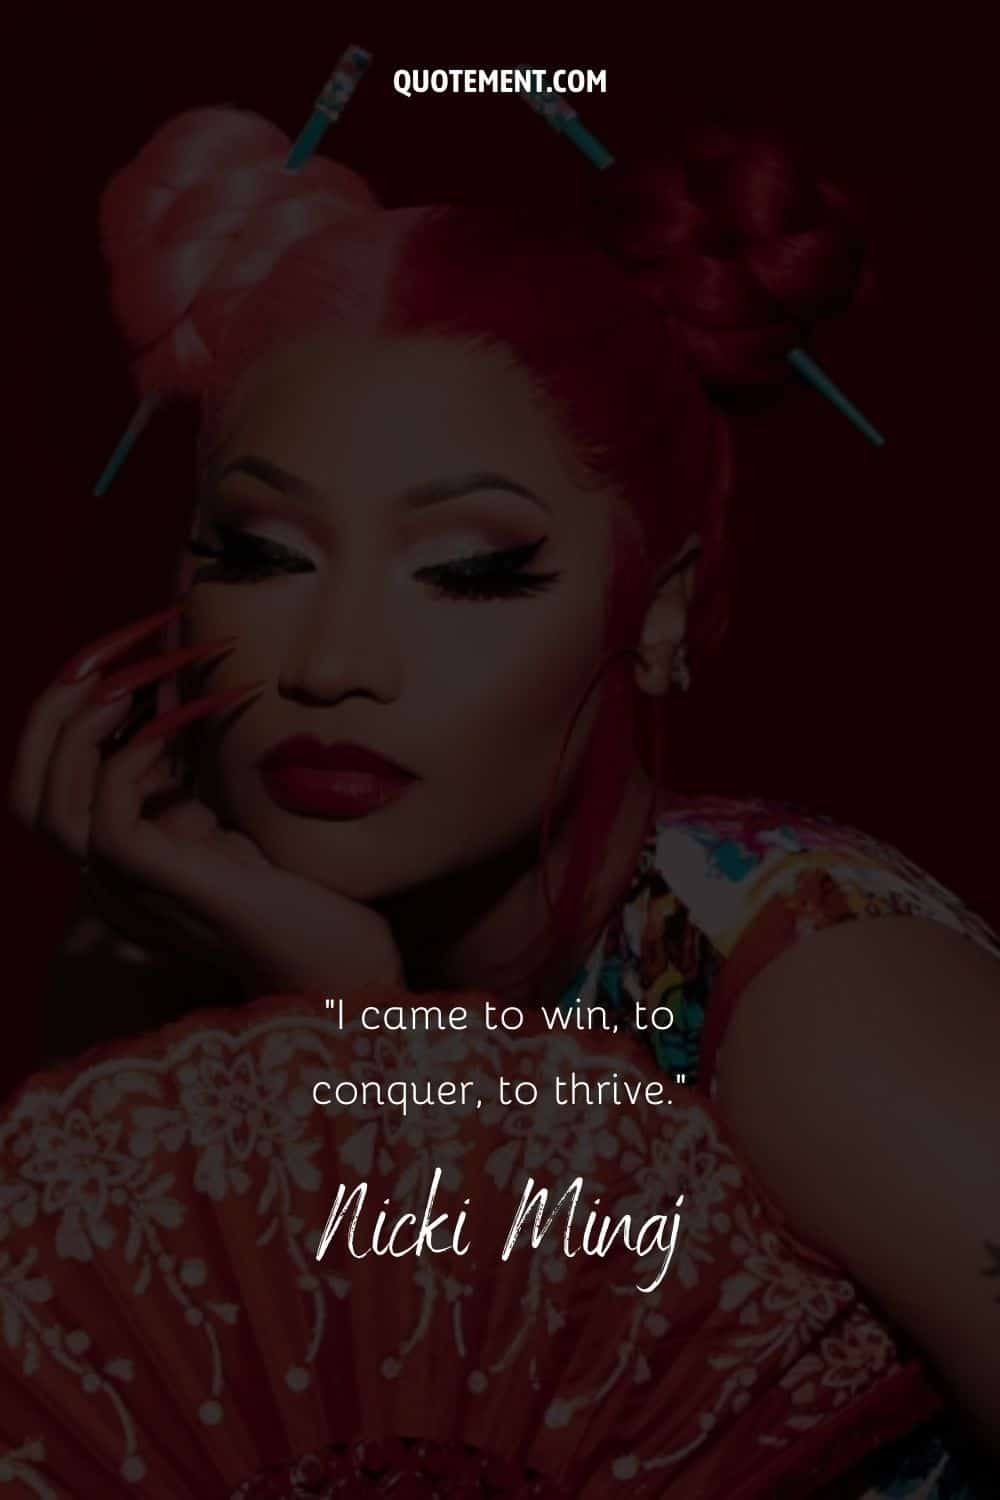 Motivational quote by Nicki and her portrait in the background